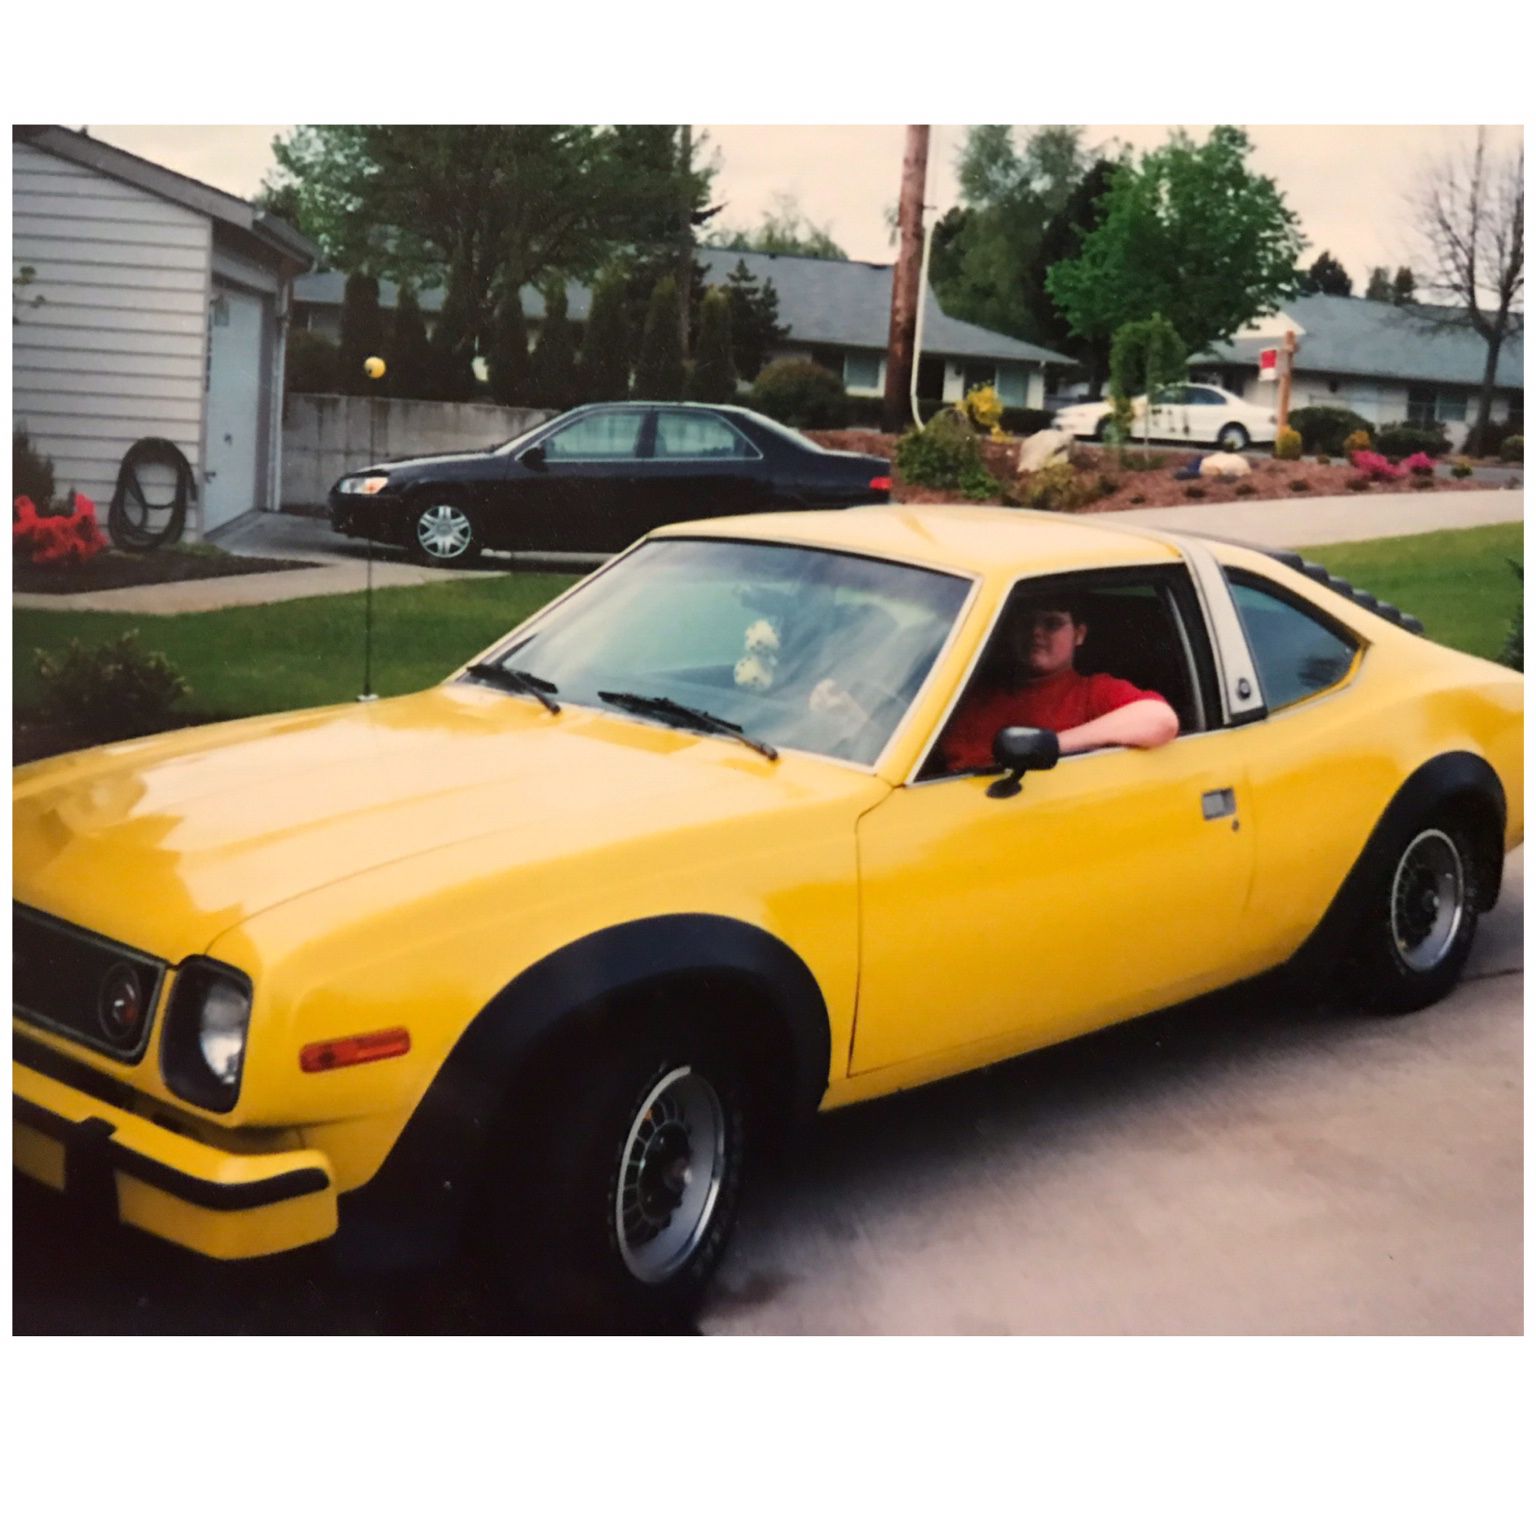 Photo VERY RARE! 1978 AMC AMX One of Only 2500 Made. Runs And Drives. Strong Motor. $3500 Or OBO